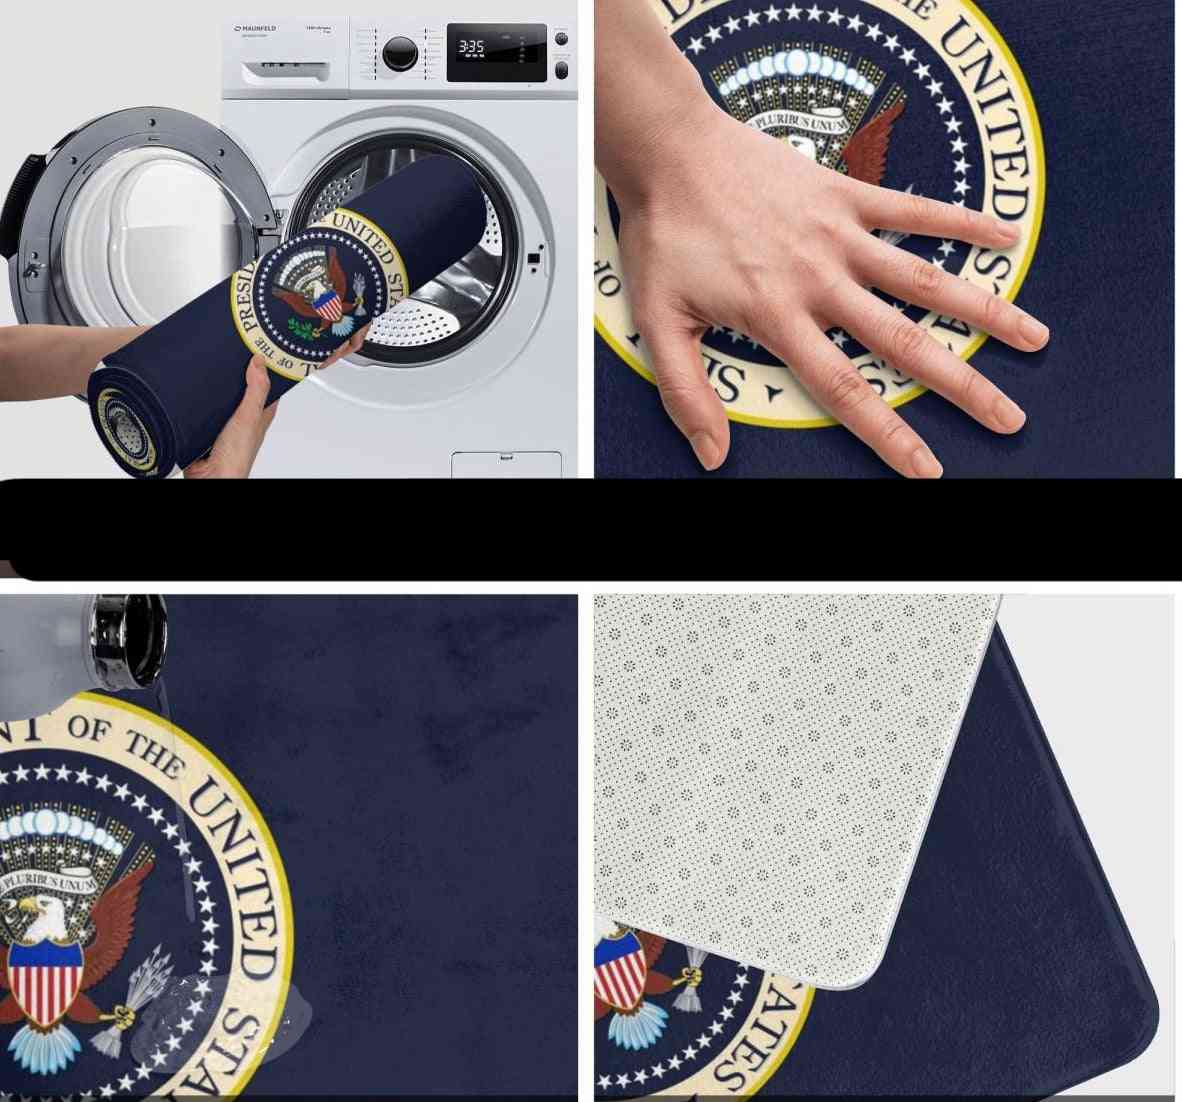 Seal Of The President Of The United States Polyester Doormat